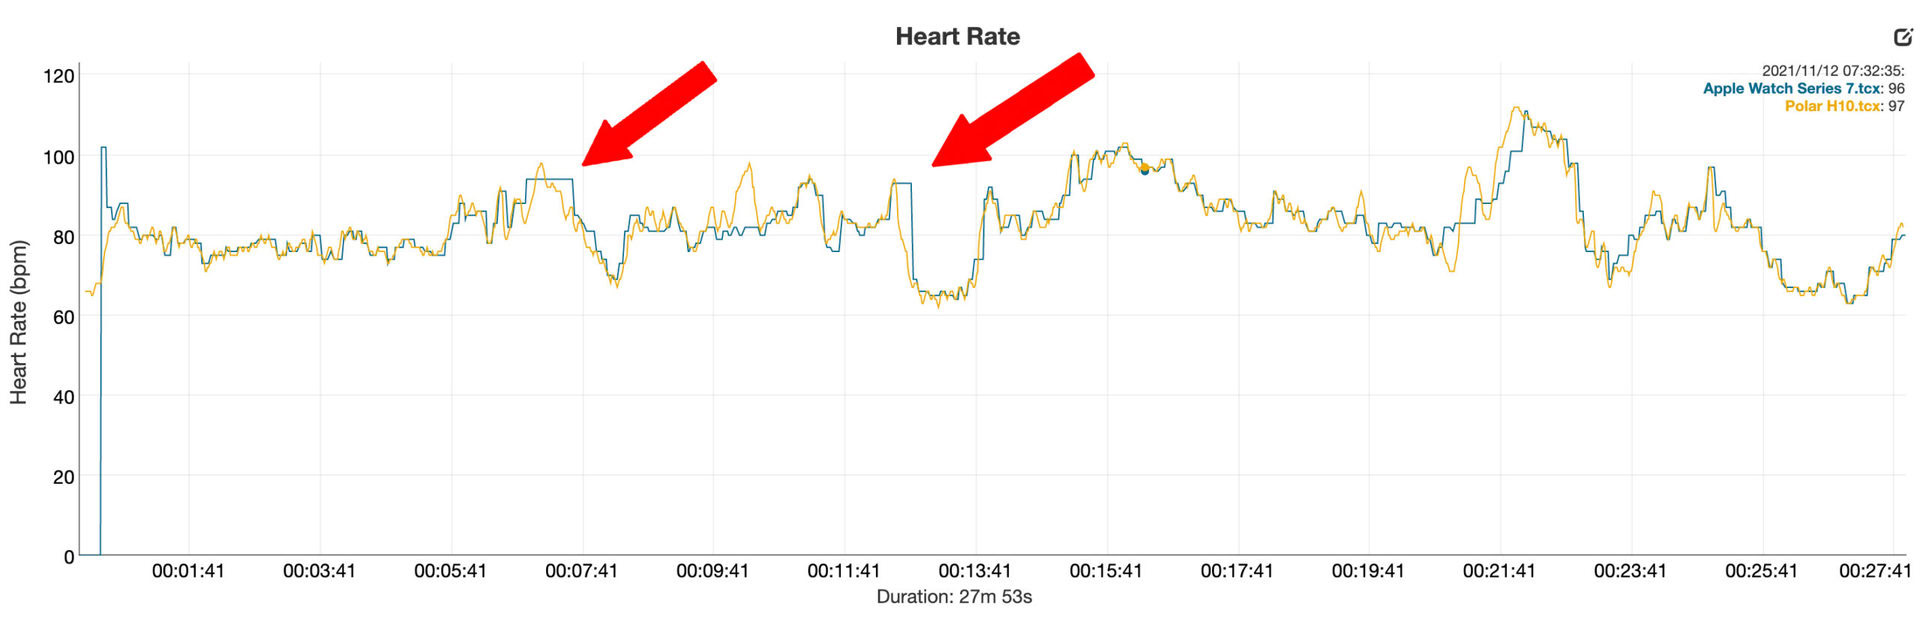 Apple Watch Series 7 review heart rate data vs Polar H10 chest strap yoga with arrows